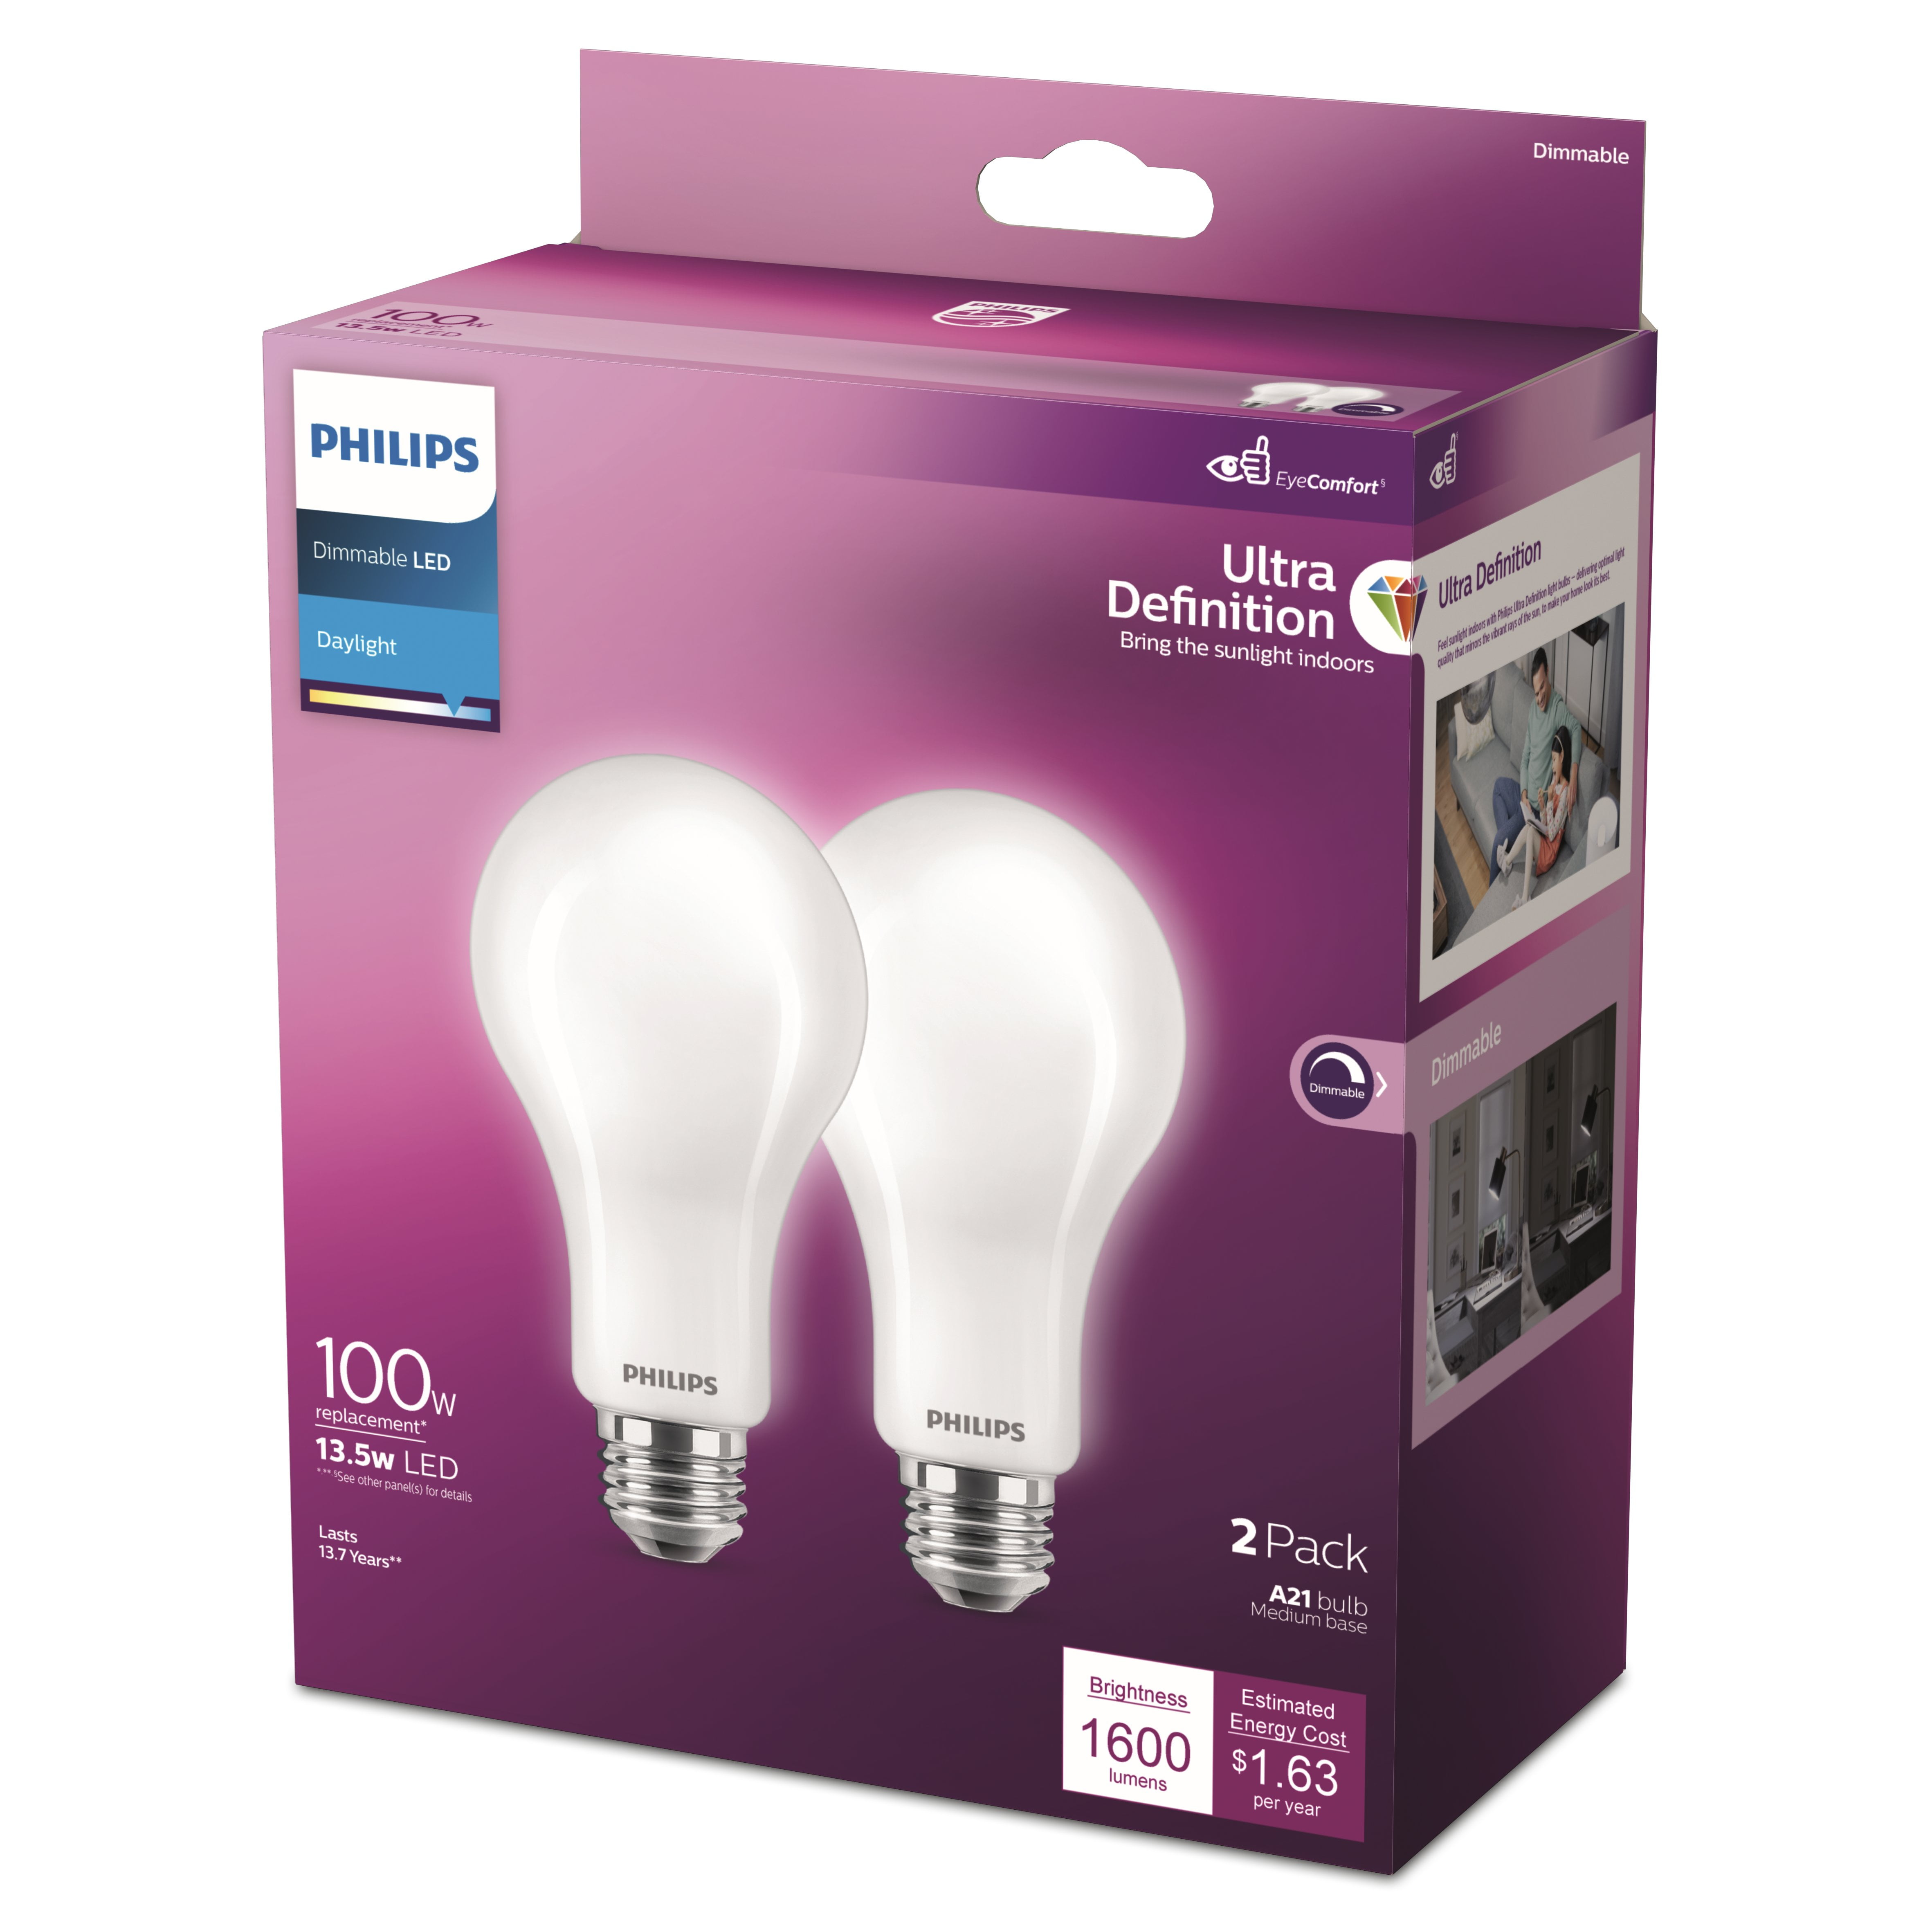 Филипс 100. Лампа Dimmable Philips 9290011704. Philips Ultra efficient.